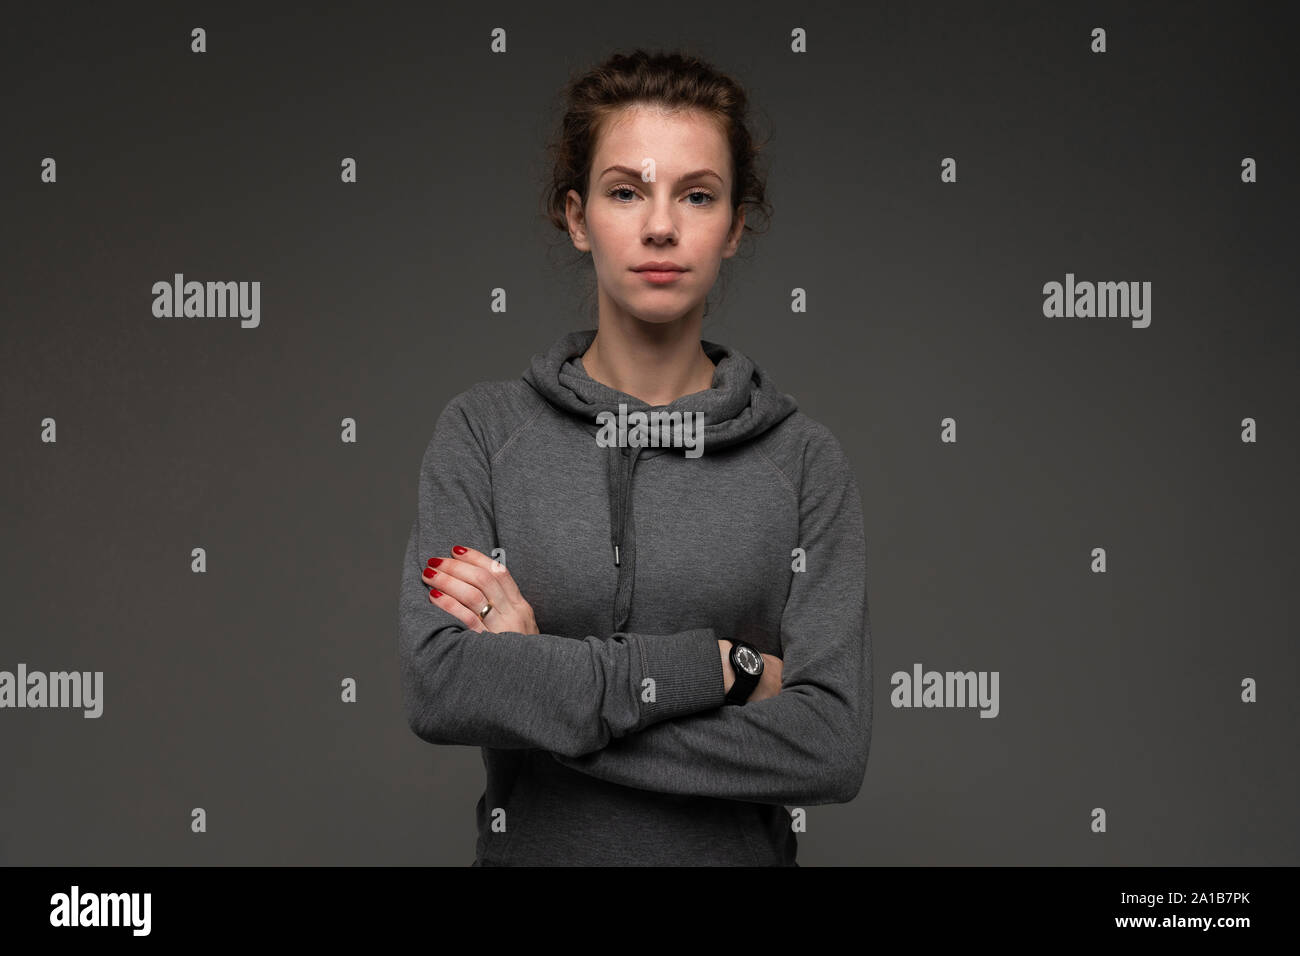 Portrait of young woman in grey hoodie against gloomy background isolated Stock Photo